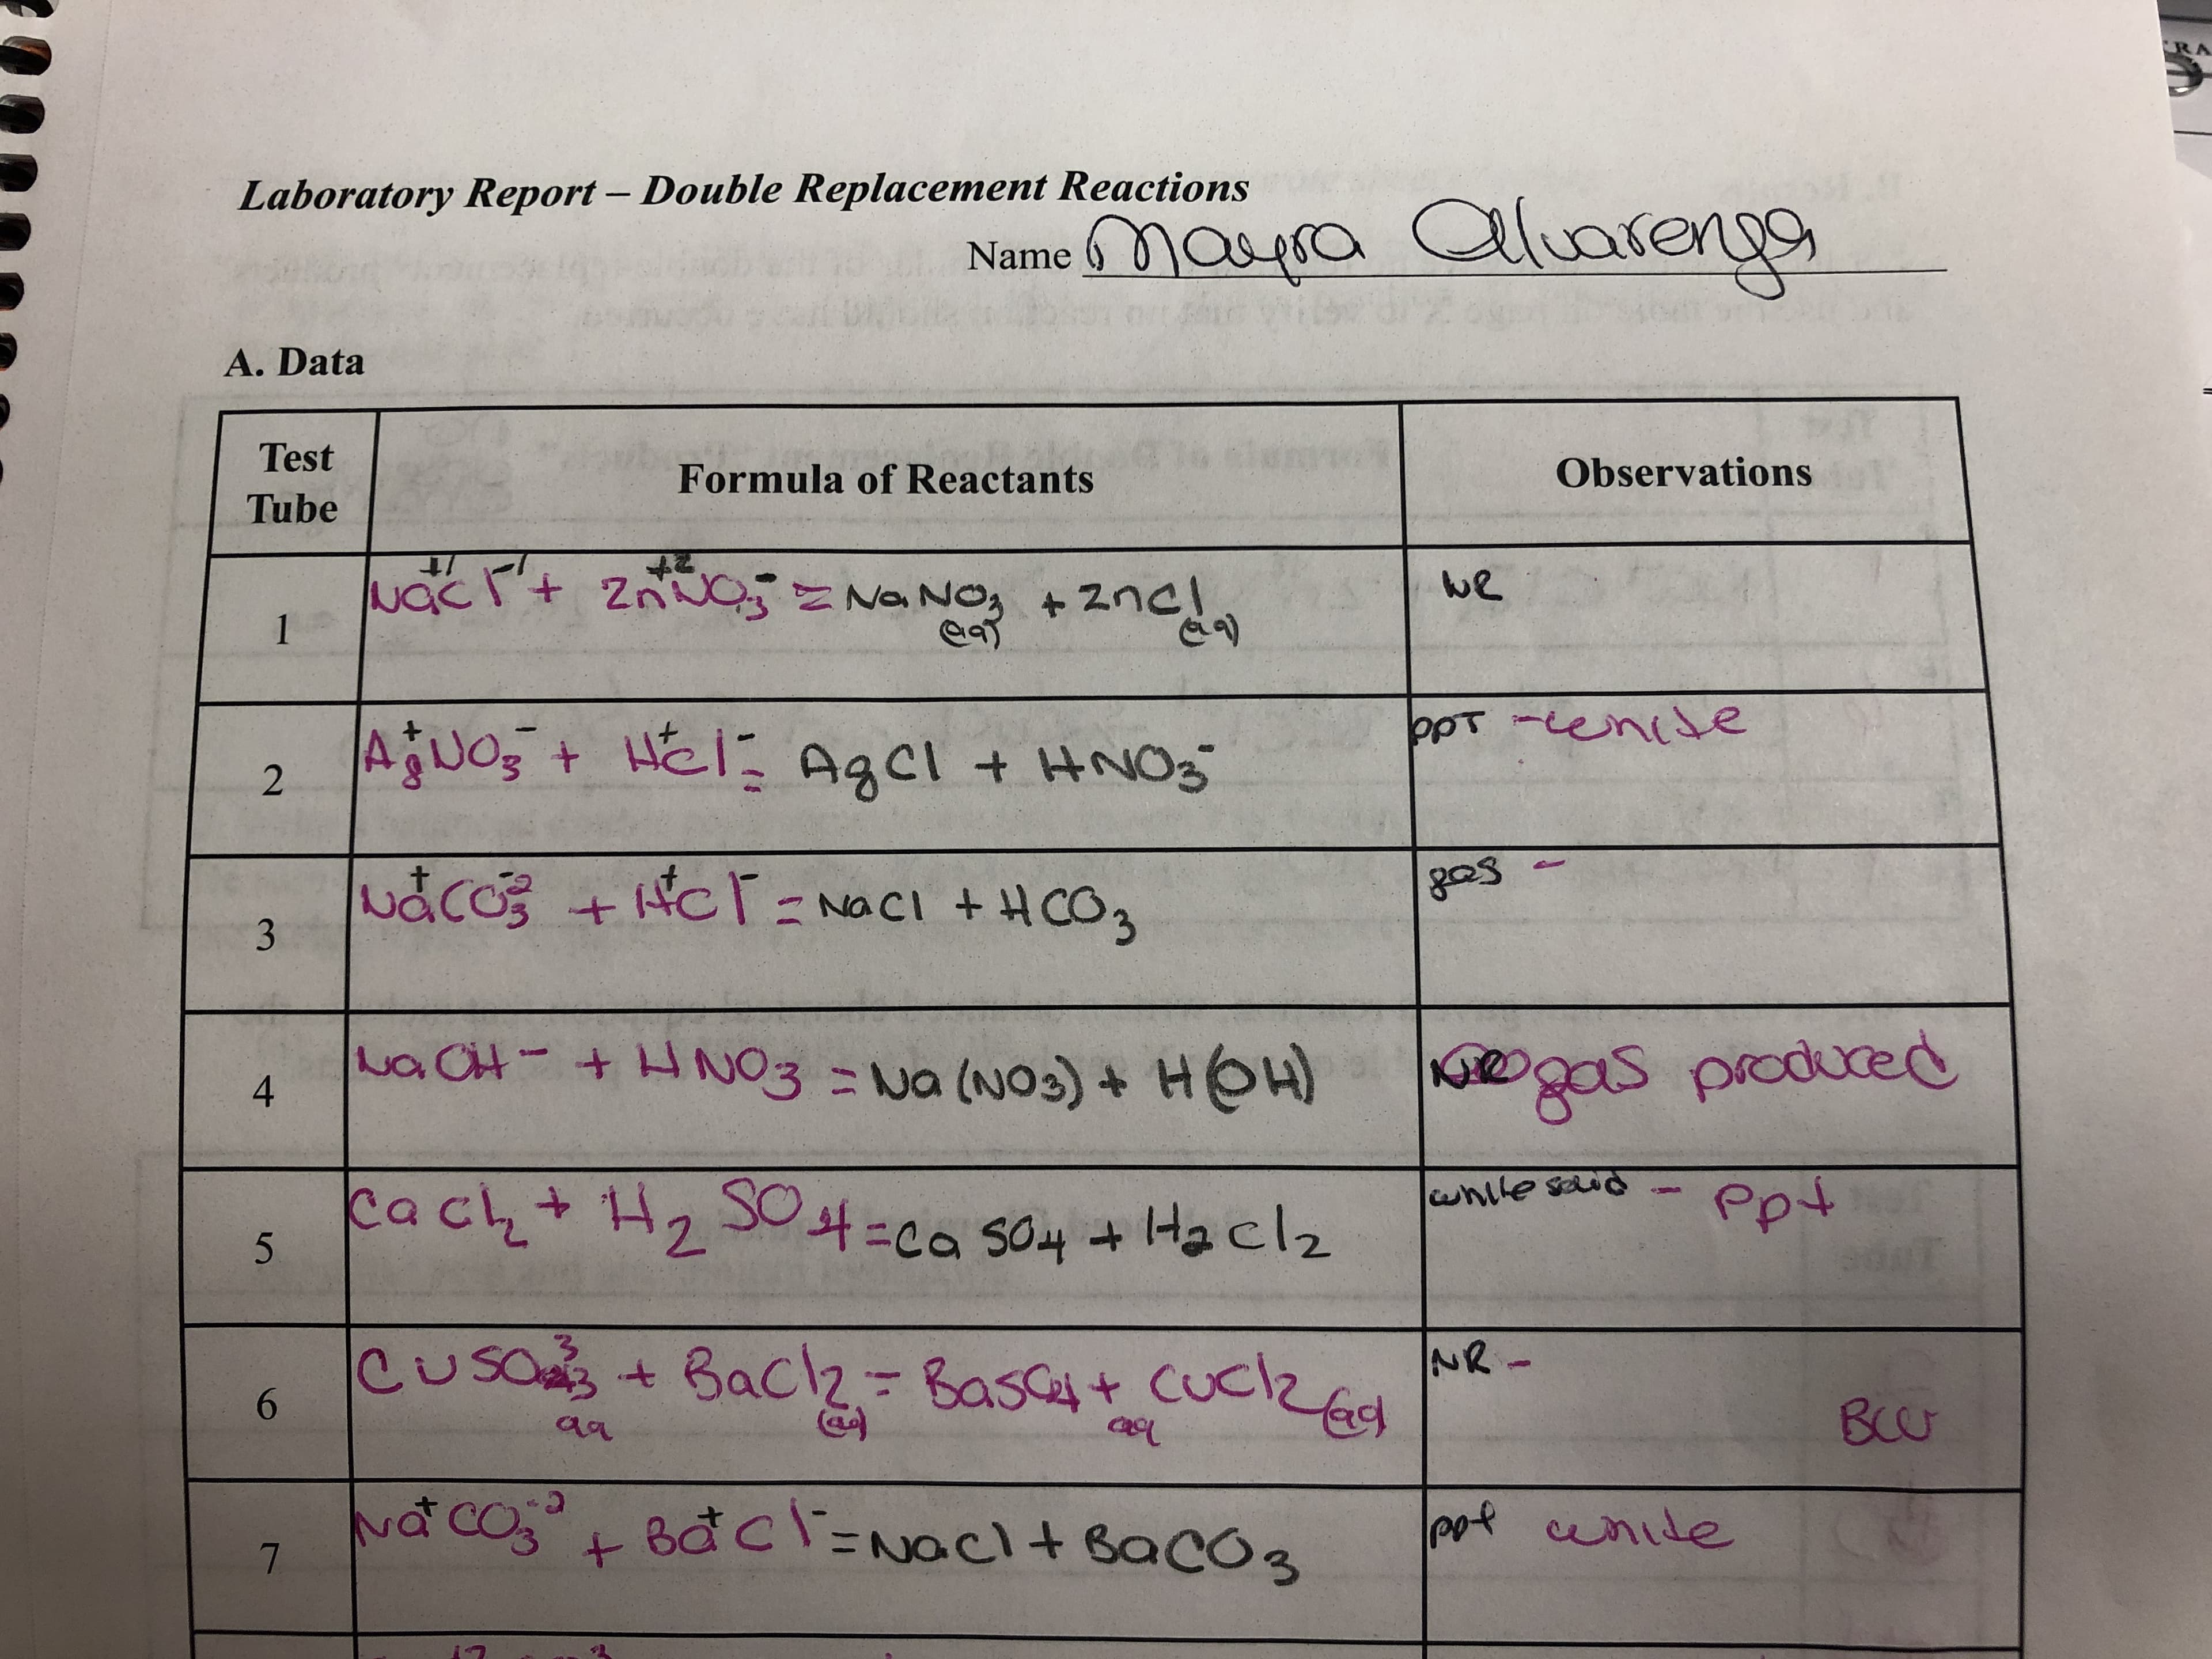 RA
Laboratory Report - Double Replacement Reactions
Name Mayra
aluarenga
A. Data
Test
Observations
Formula of Reactants
Tube
we
+ ZNNO NO NO, +2nc
1
oPT-eniste
AUO5+ HEI Agcl + HNOS
wacos
+cT= Naci + H CO3
wa CH- +HNO3 =Na (NOS) + HO
K@gas producedd
Ppt
Cach+ H, O4=ca so4 + Haclz
while said
NR-
Cusa+ Bacz2= Bascit Cuczs
CUSO +
6.
BCU
Na co
Bđcl=Naci+ Bac0g
pot unide
2.
3.
4-
